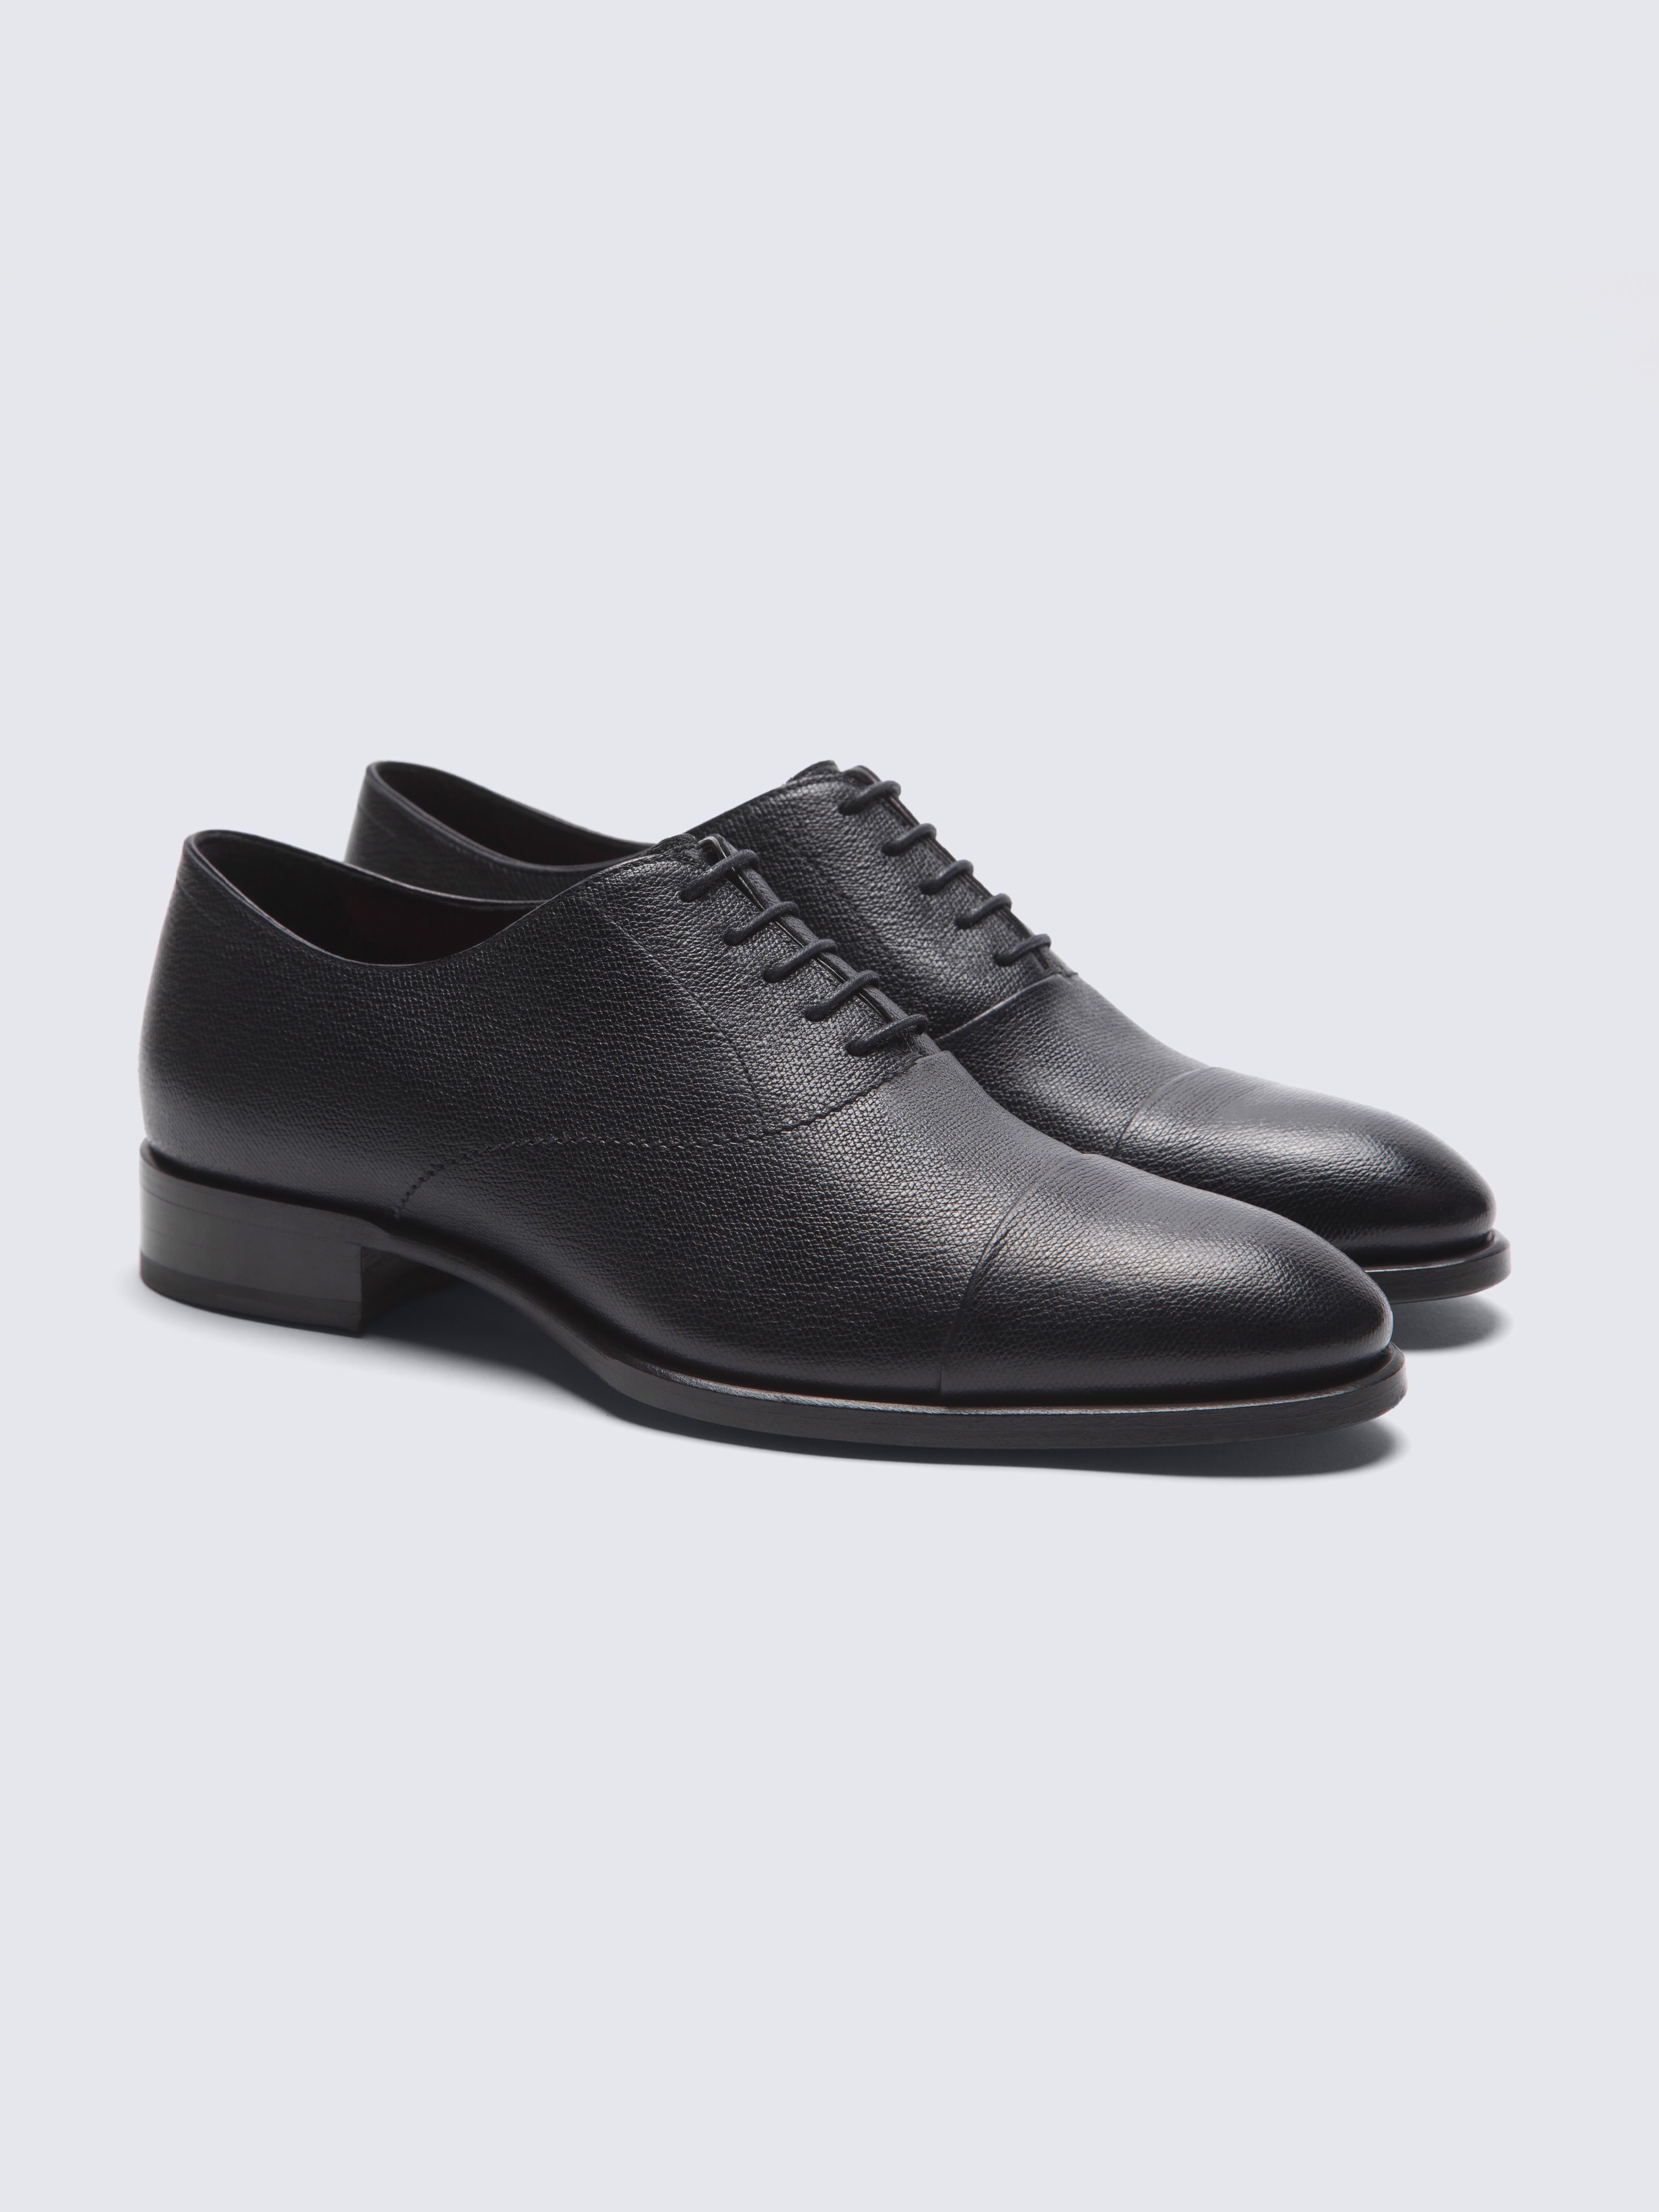 Black leather Oxford shoes | Brioni® US Official Store